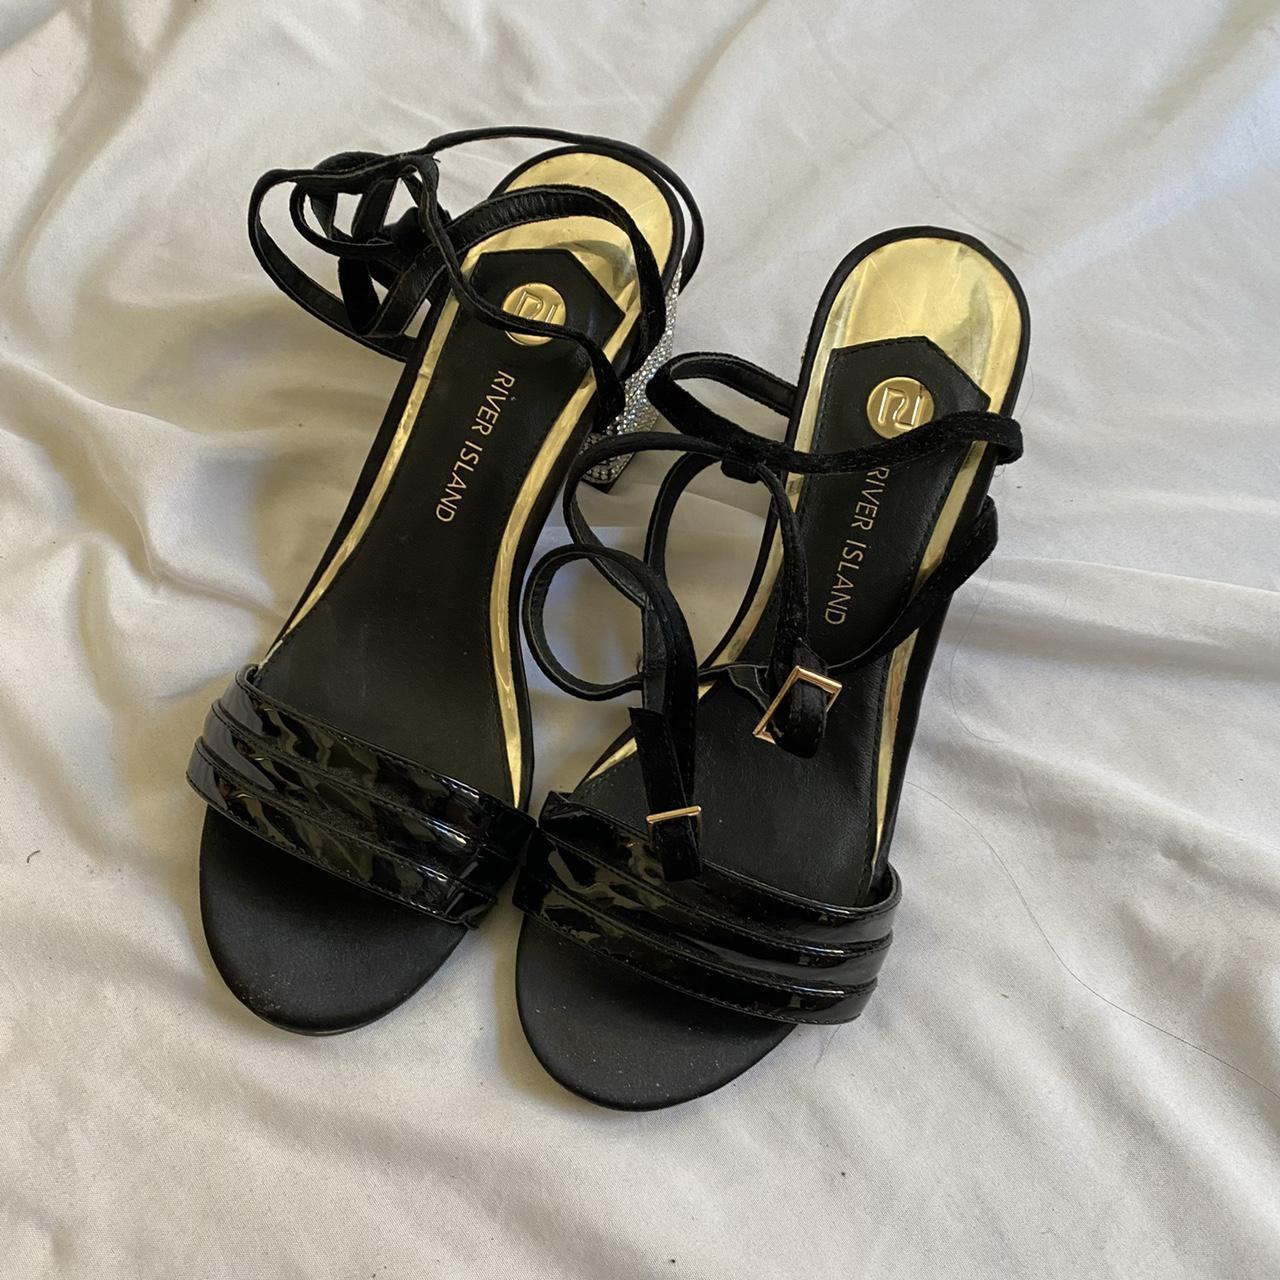 River Island Women's Black and Silver Sandals (2)